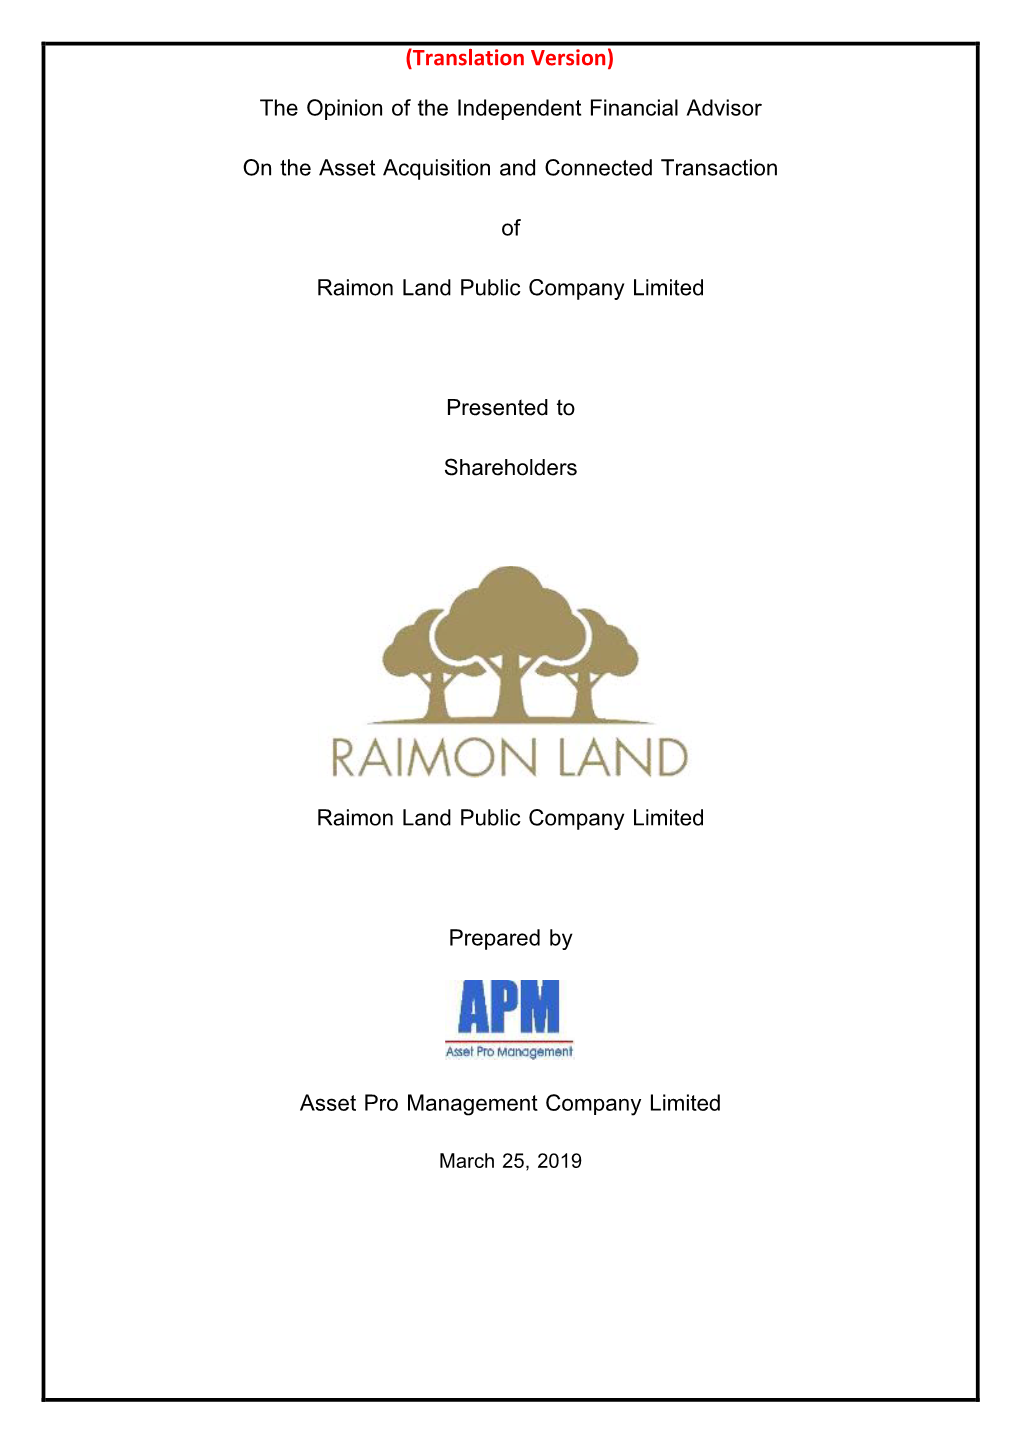 The Opinion of the Independent Financial Advisor on the Asset Acquisition and Connected Transaction of Raimon Land Public Company Limited